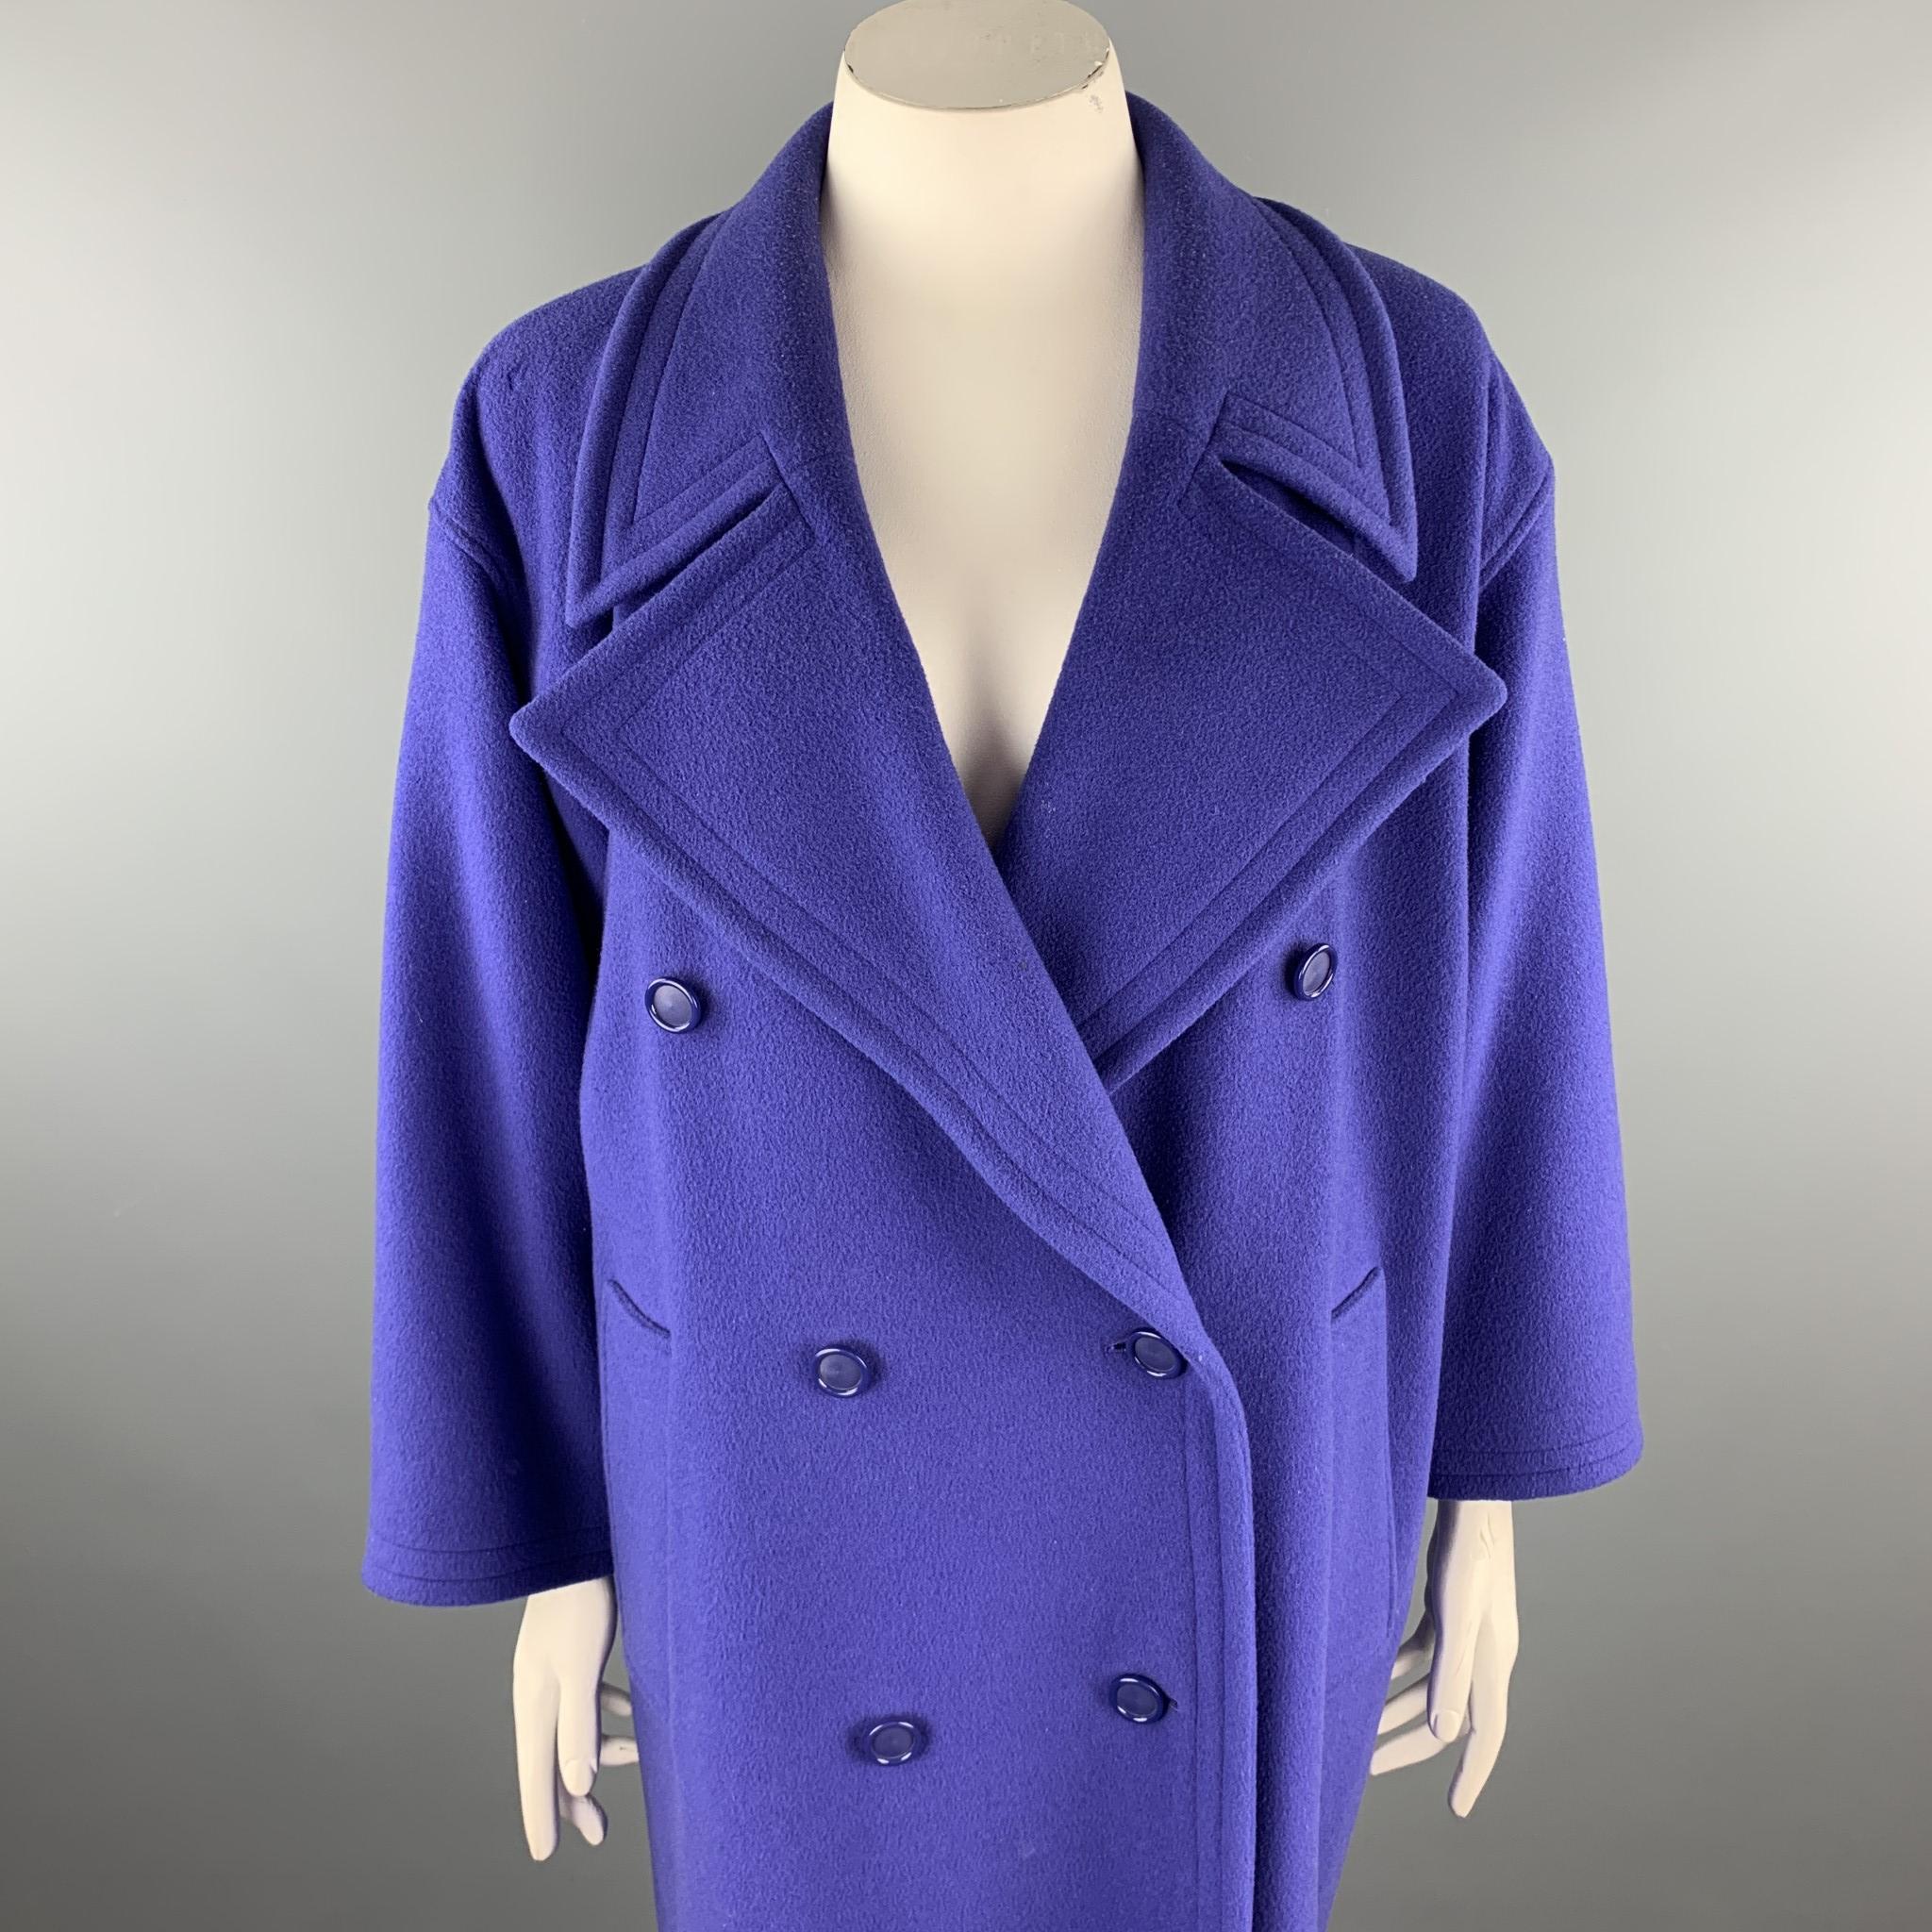 EMANUEL UNGARO coat comes in a purple wool / nylon with a full liner featuring a notch lapel, back belt, and a double breasted closure. Made in Italy.

Good Pre-Owned Condition.
Marked: 46/12

Measurements:

Shoulder: 22 in. 
Chest: 48 in. 
Sleeve: